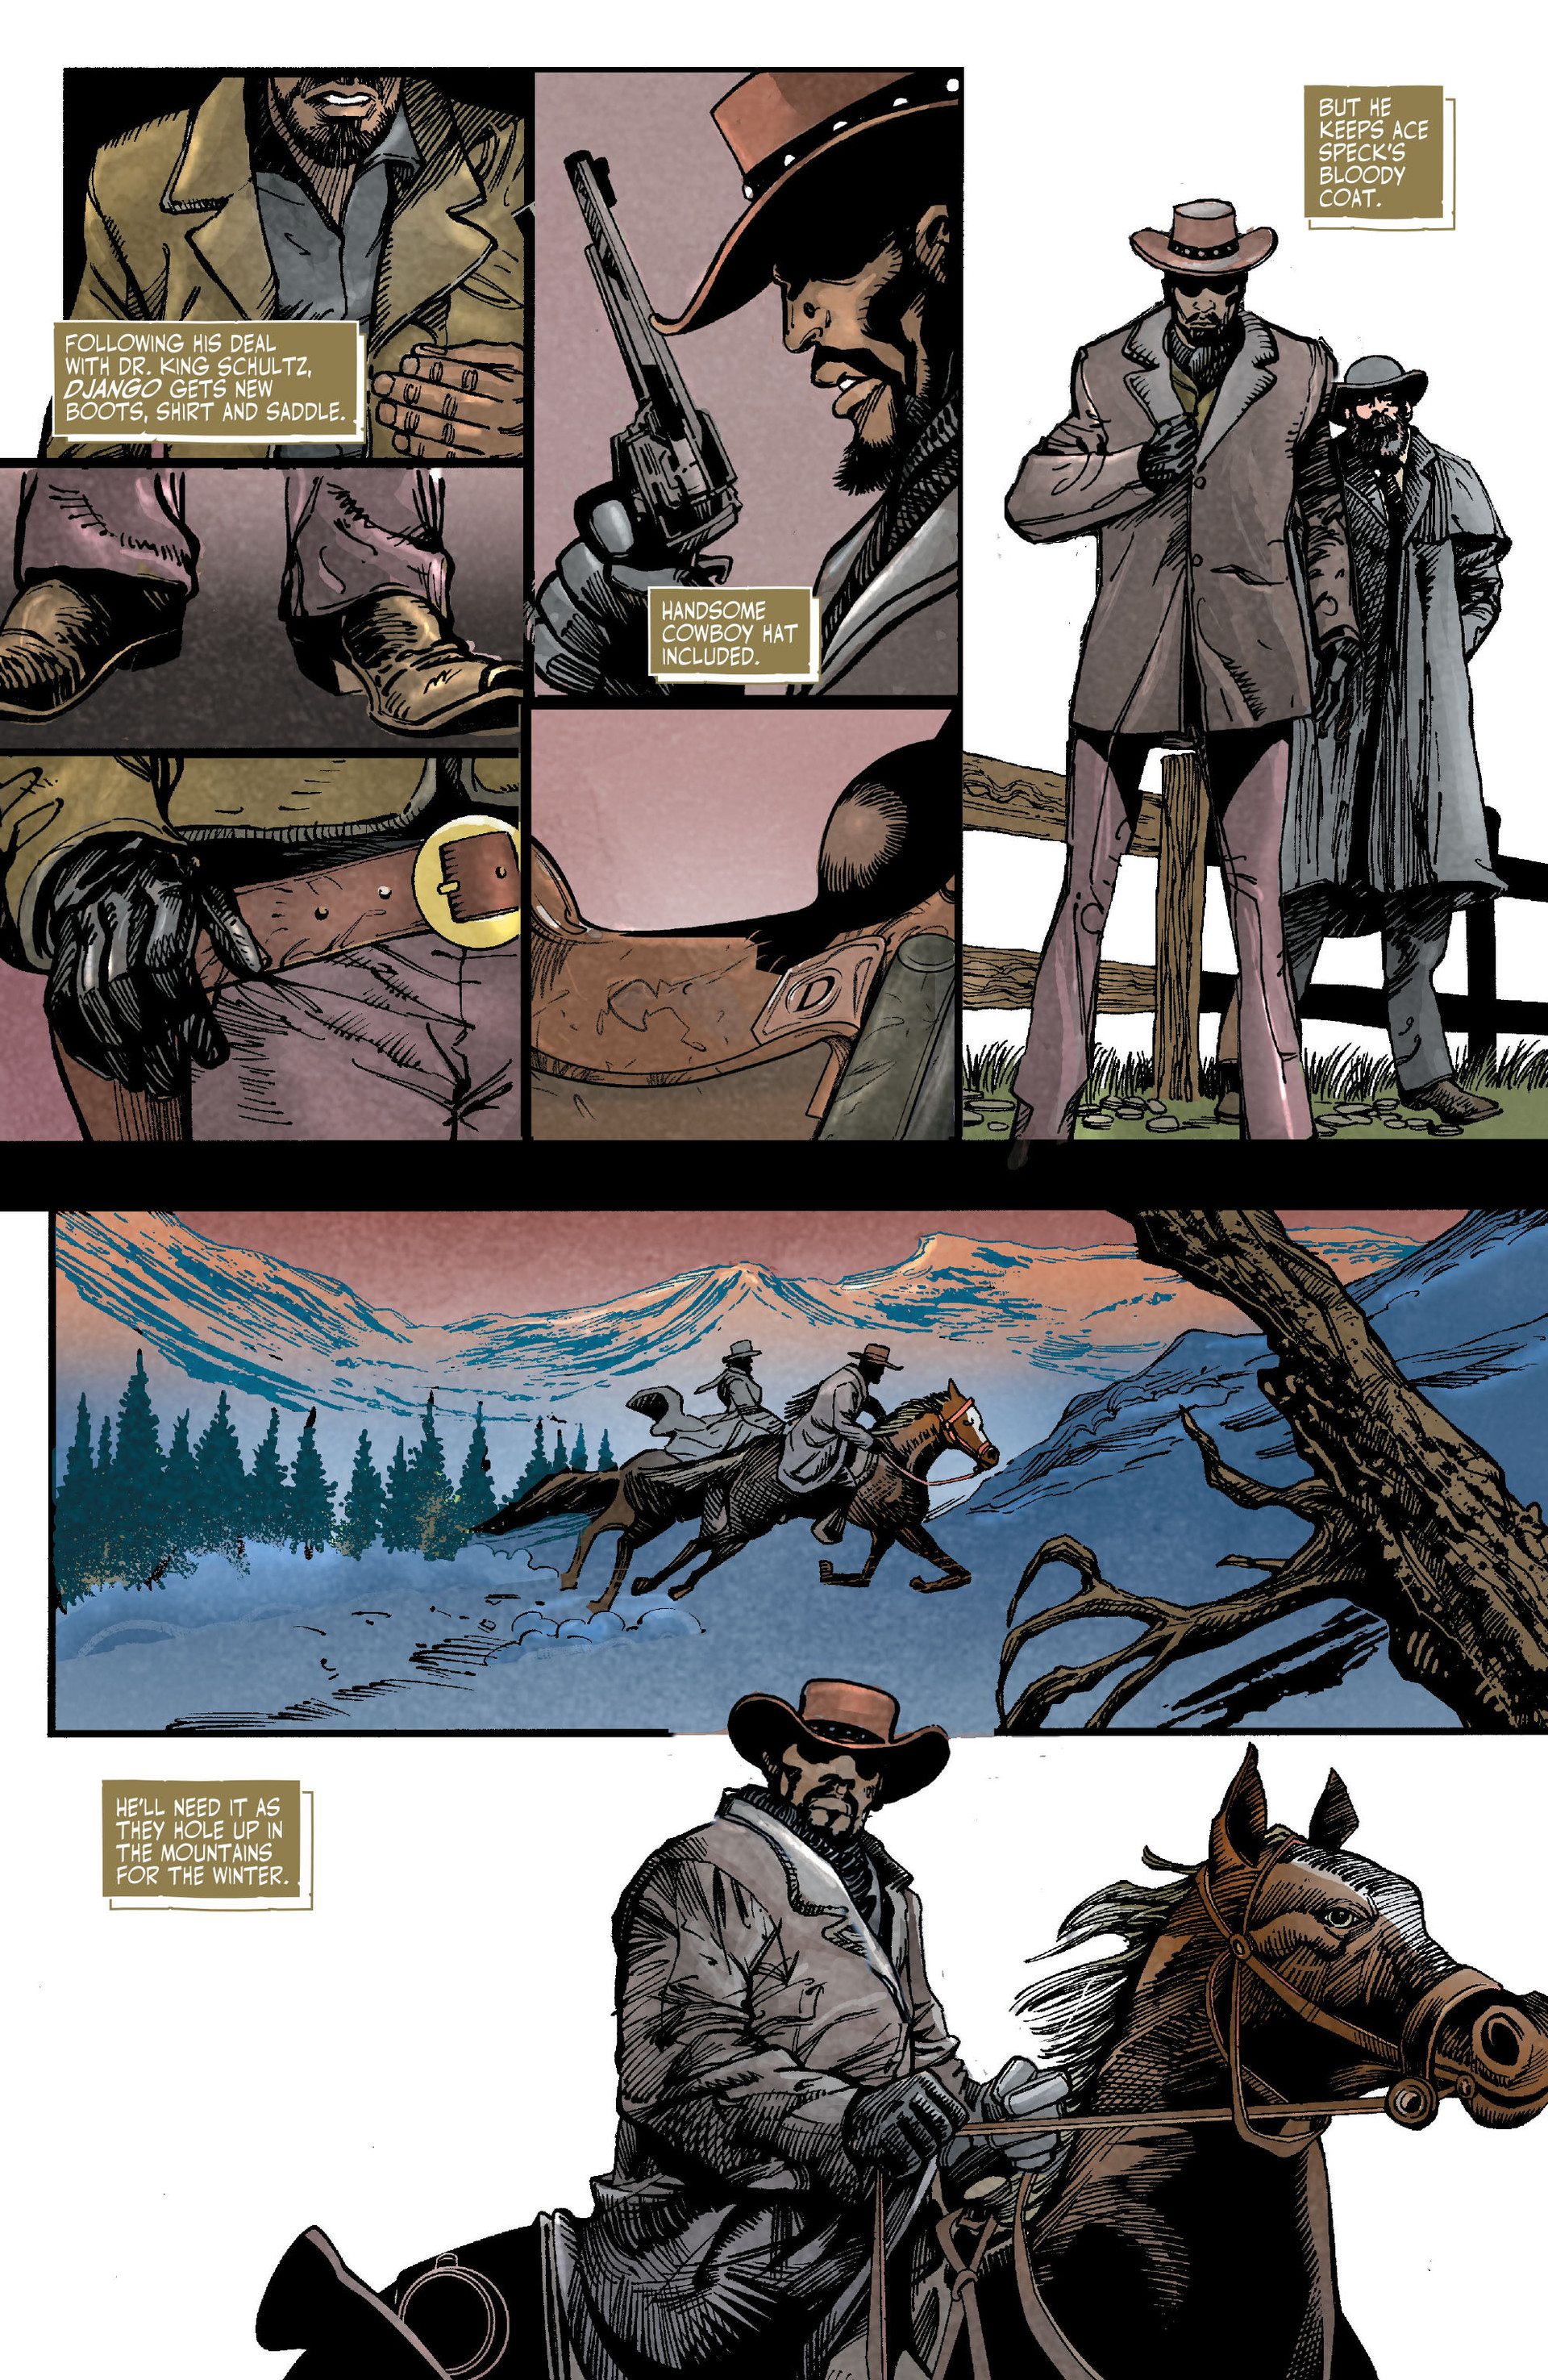 Django Unchained Issue 3 Read Django Unchained Issue 3 Comic Online In High Quality Read Full Comic Online For Free Read Comics Online In High Quality